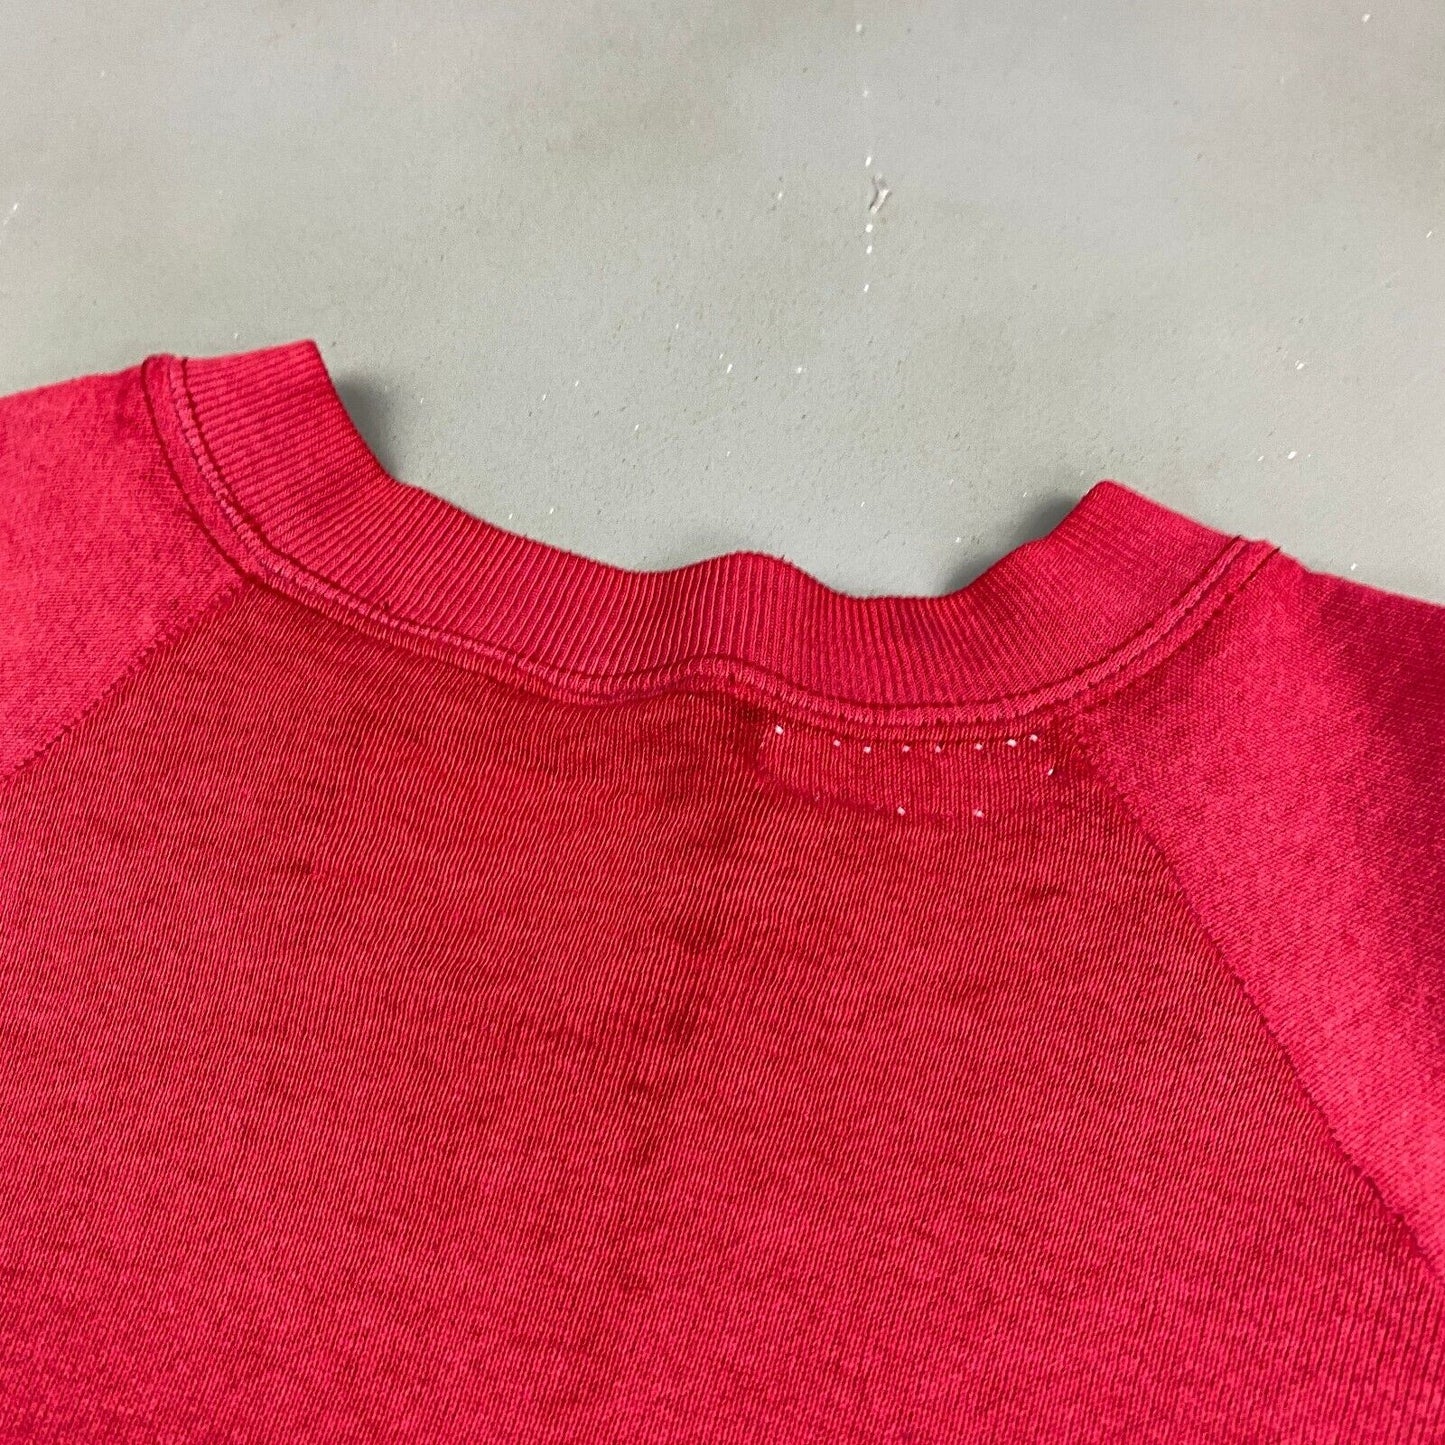 VINTAGE 90s Faded Blank Red Crewneck Sweater sz XL Adult